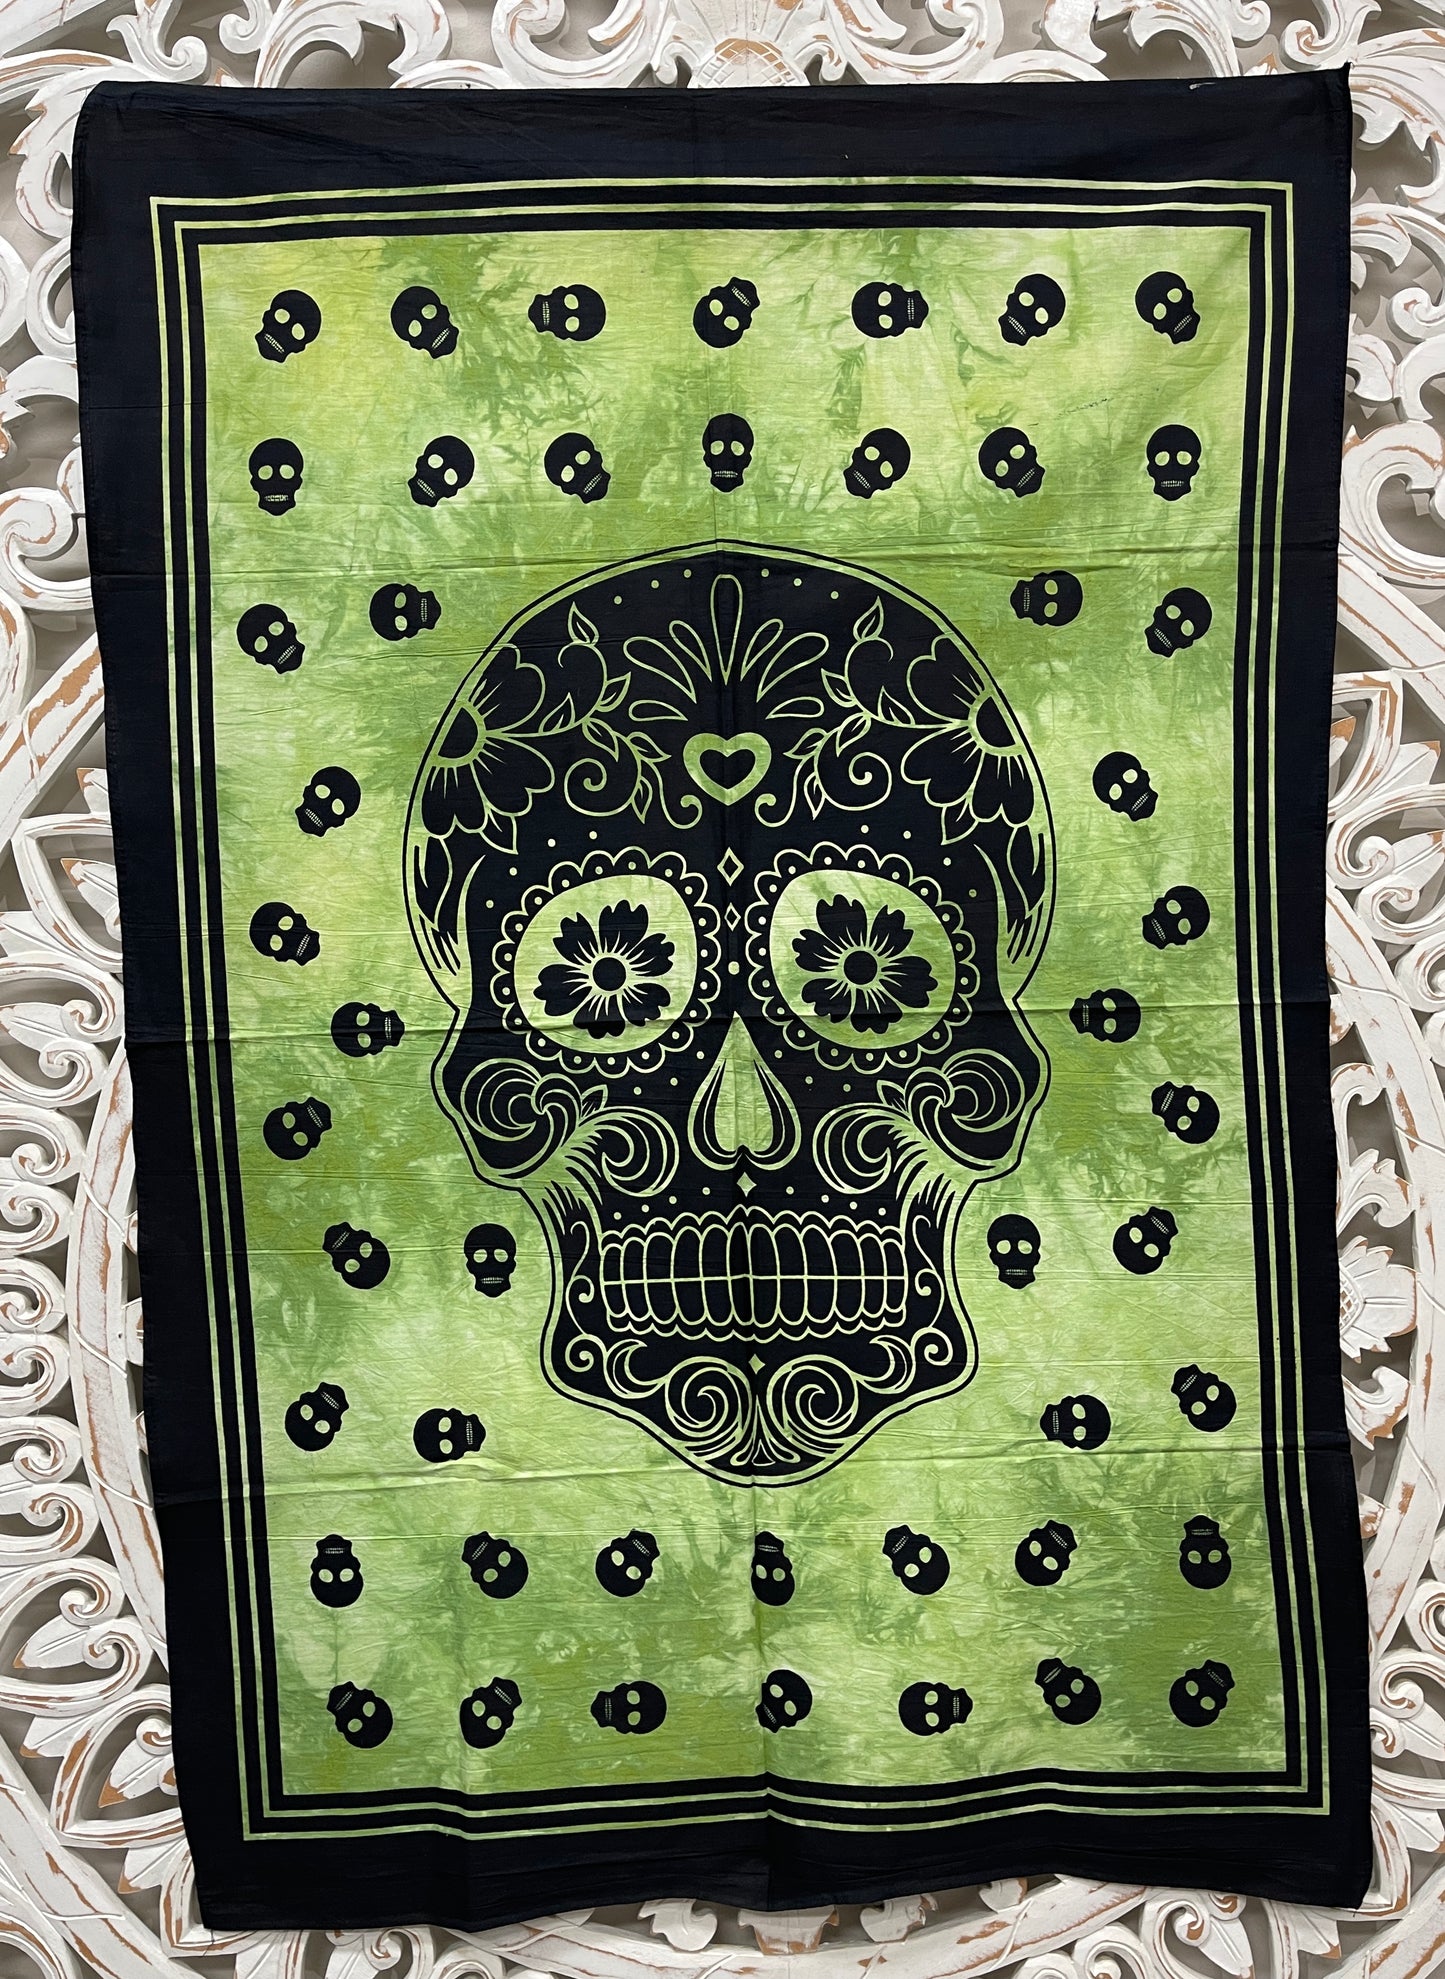 Hand printed Fabric Posters Mini Day of the Dead Skull Tapestries - Available in 3 Colors